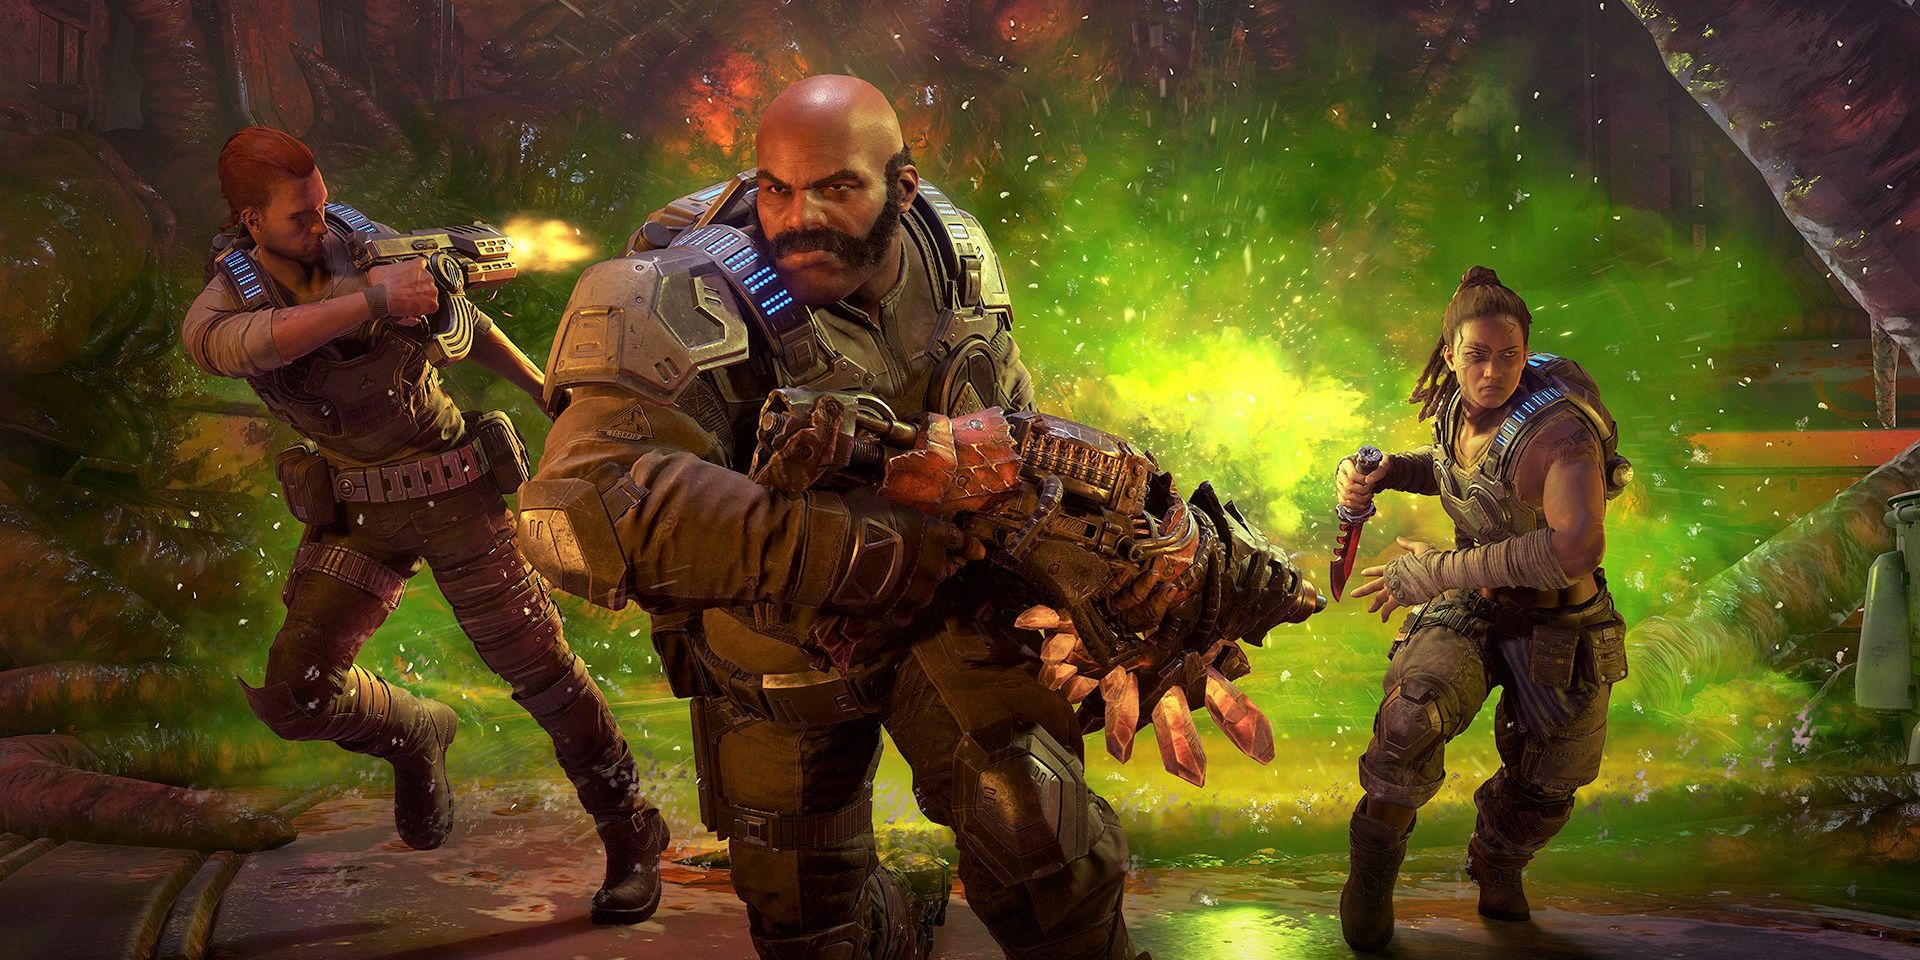 Characters from the video game Gears of War 5.